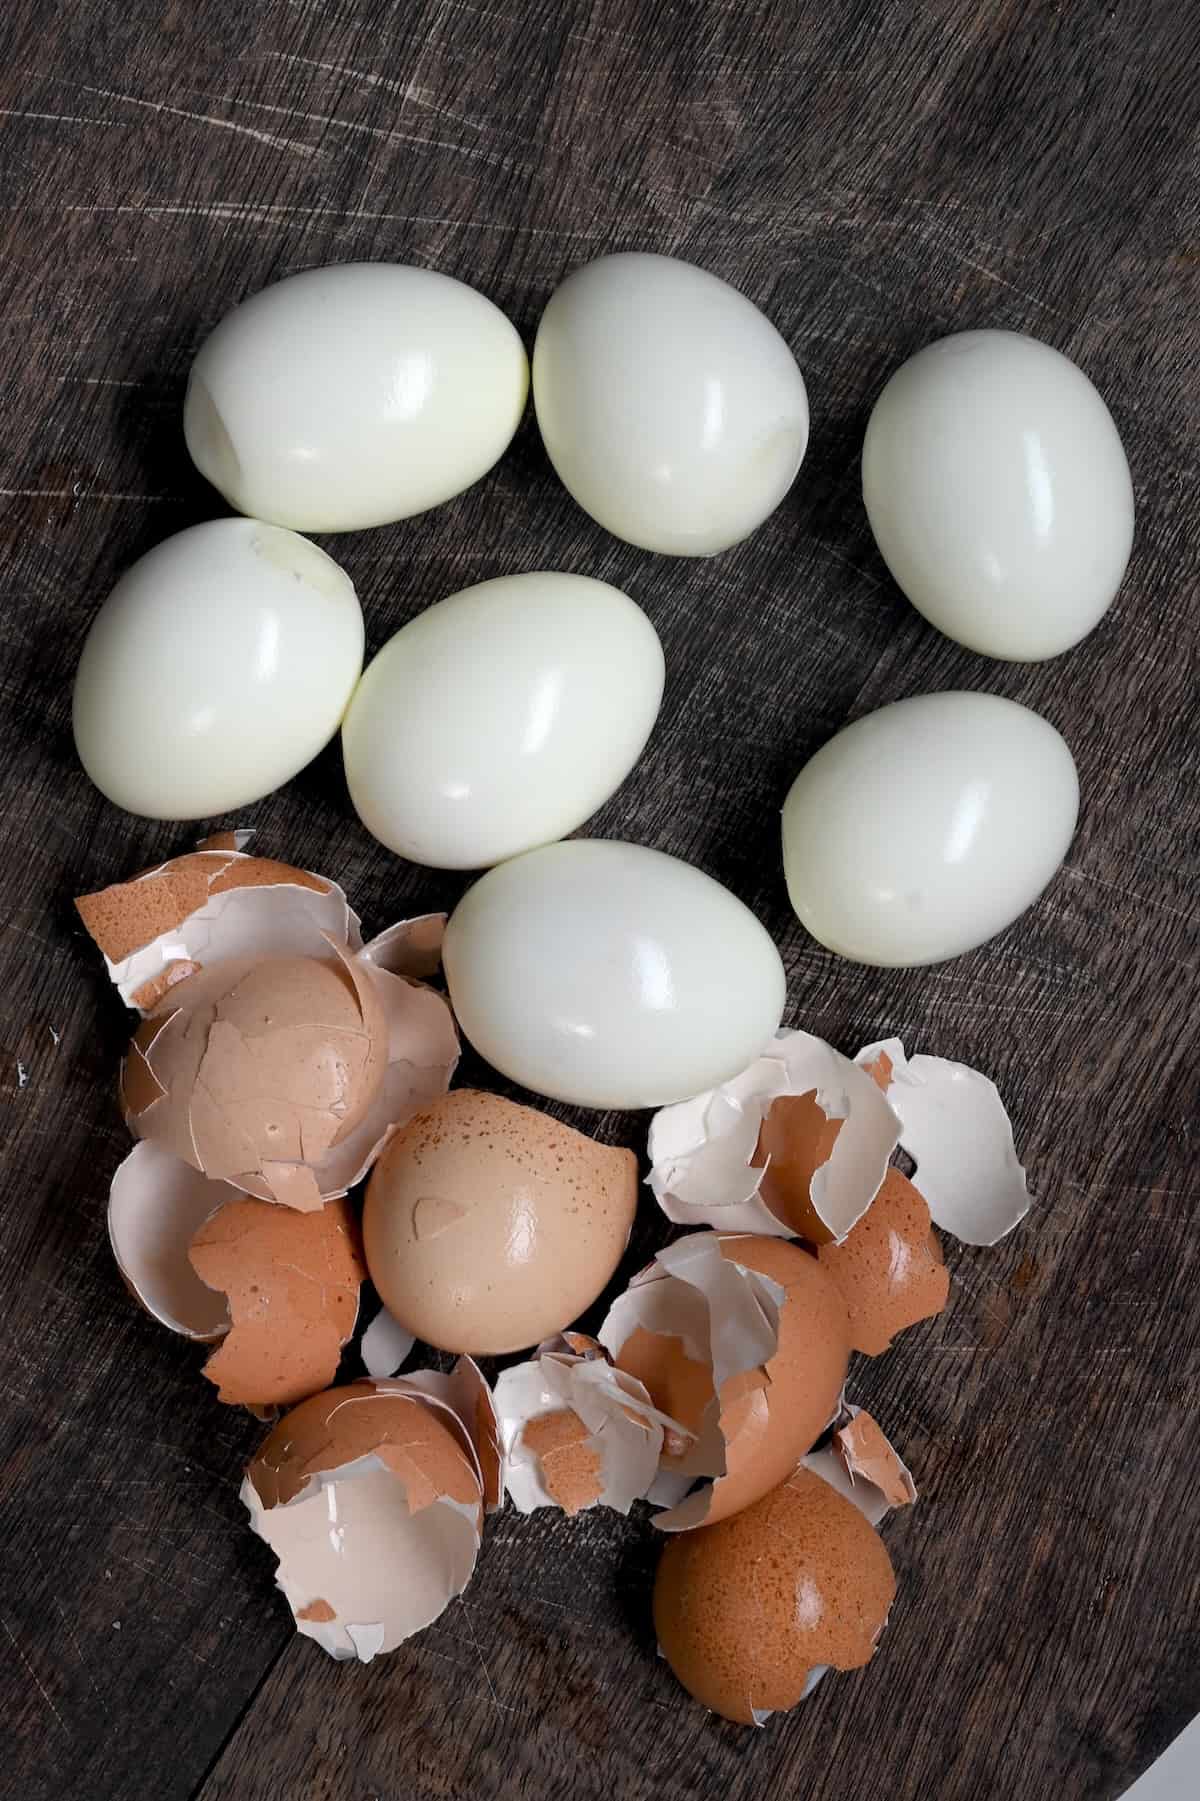 https://www.alphafoodie.com/wp-content/uploads/2023/08/Boiled-Eggs-Boiled-eggs-main-1-new.jpeg